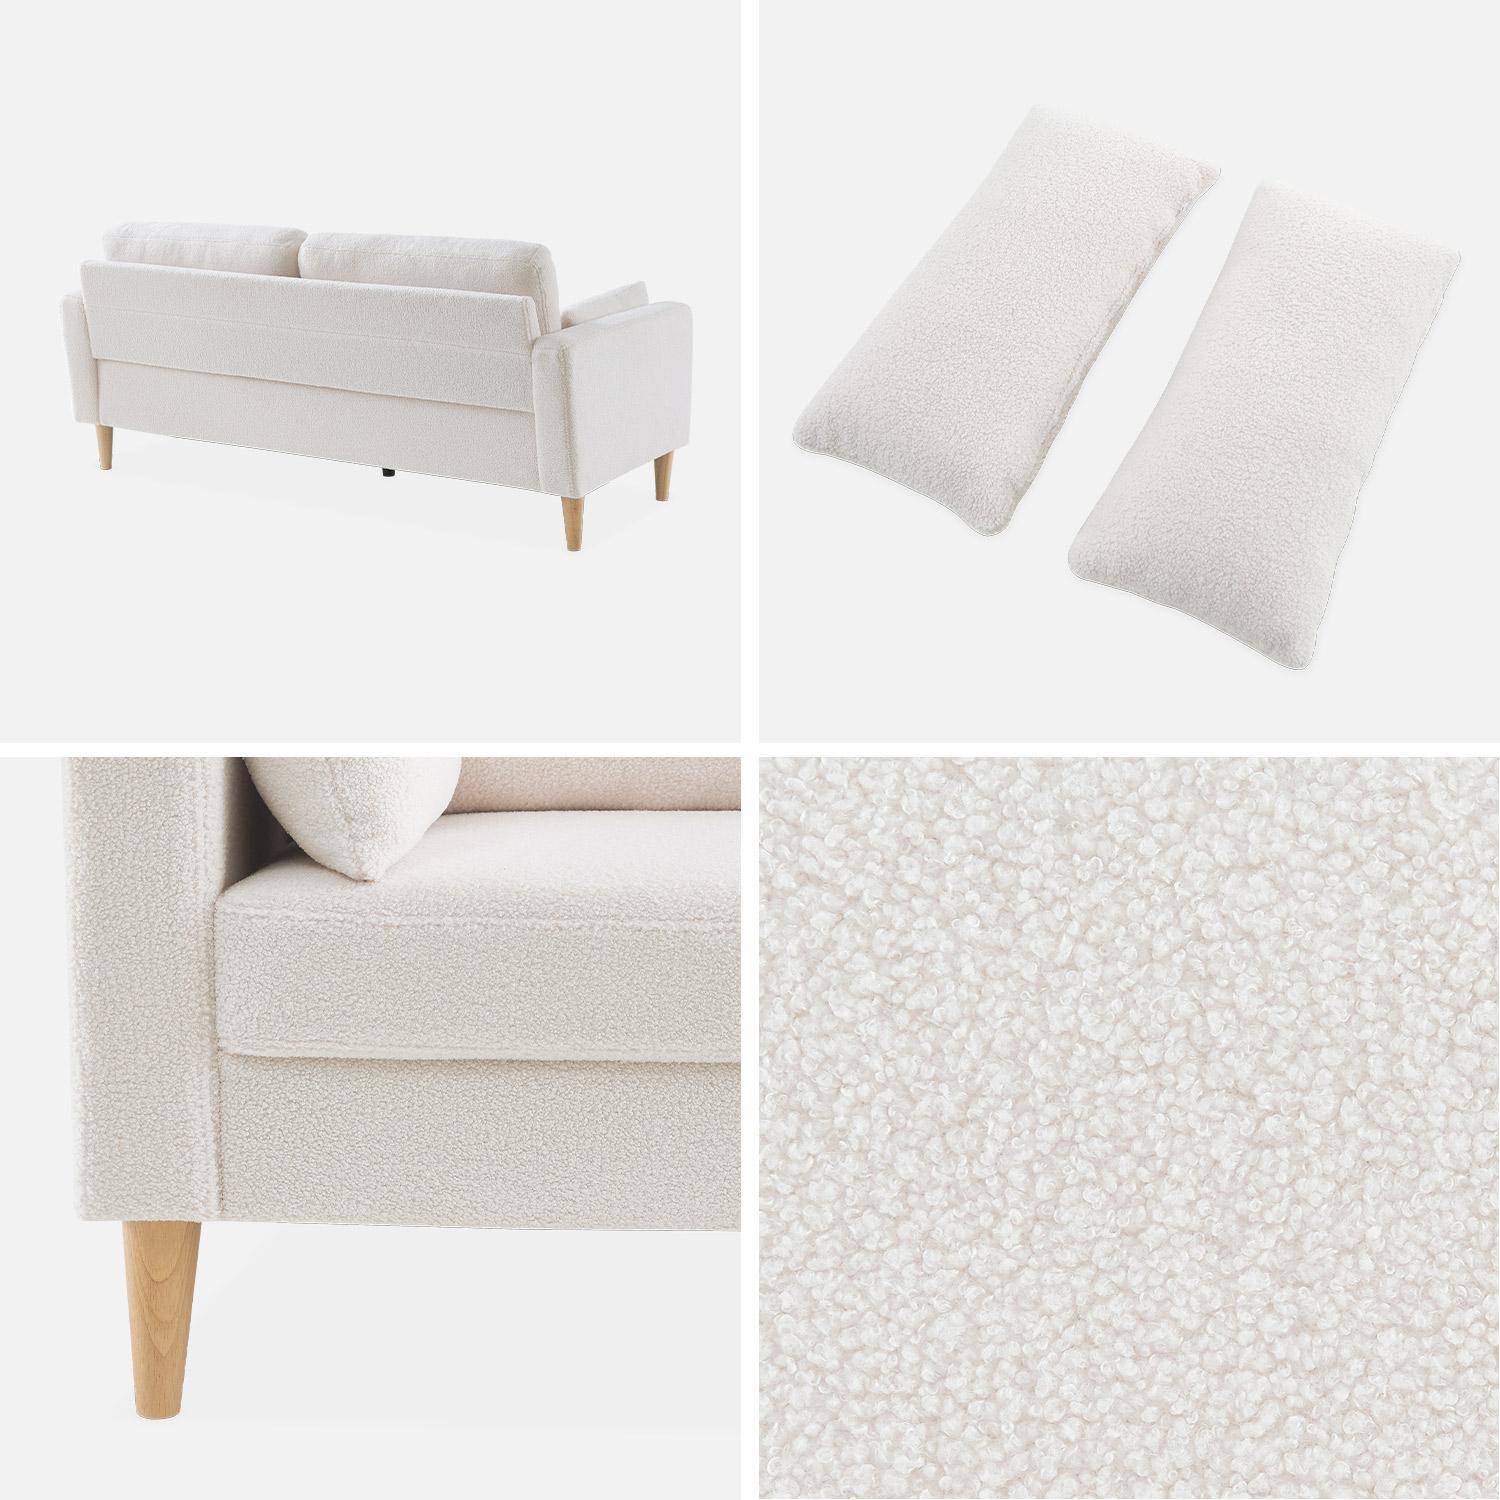 3-seater sofa Scandi-style and armchair with wooden legs, white boucle, Bjorn duo,sweeek,Photo2